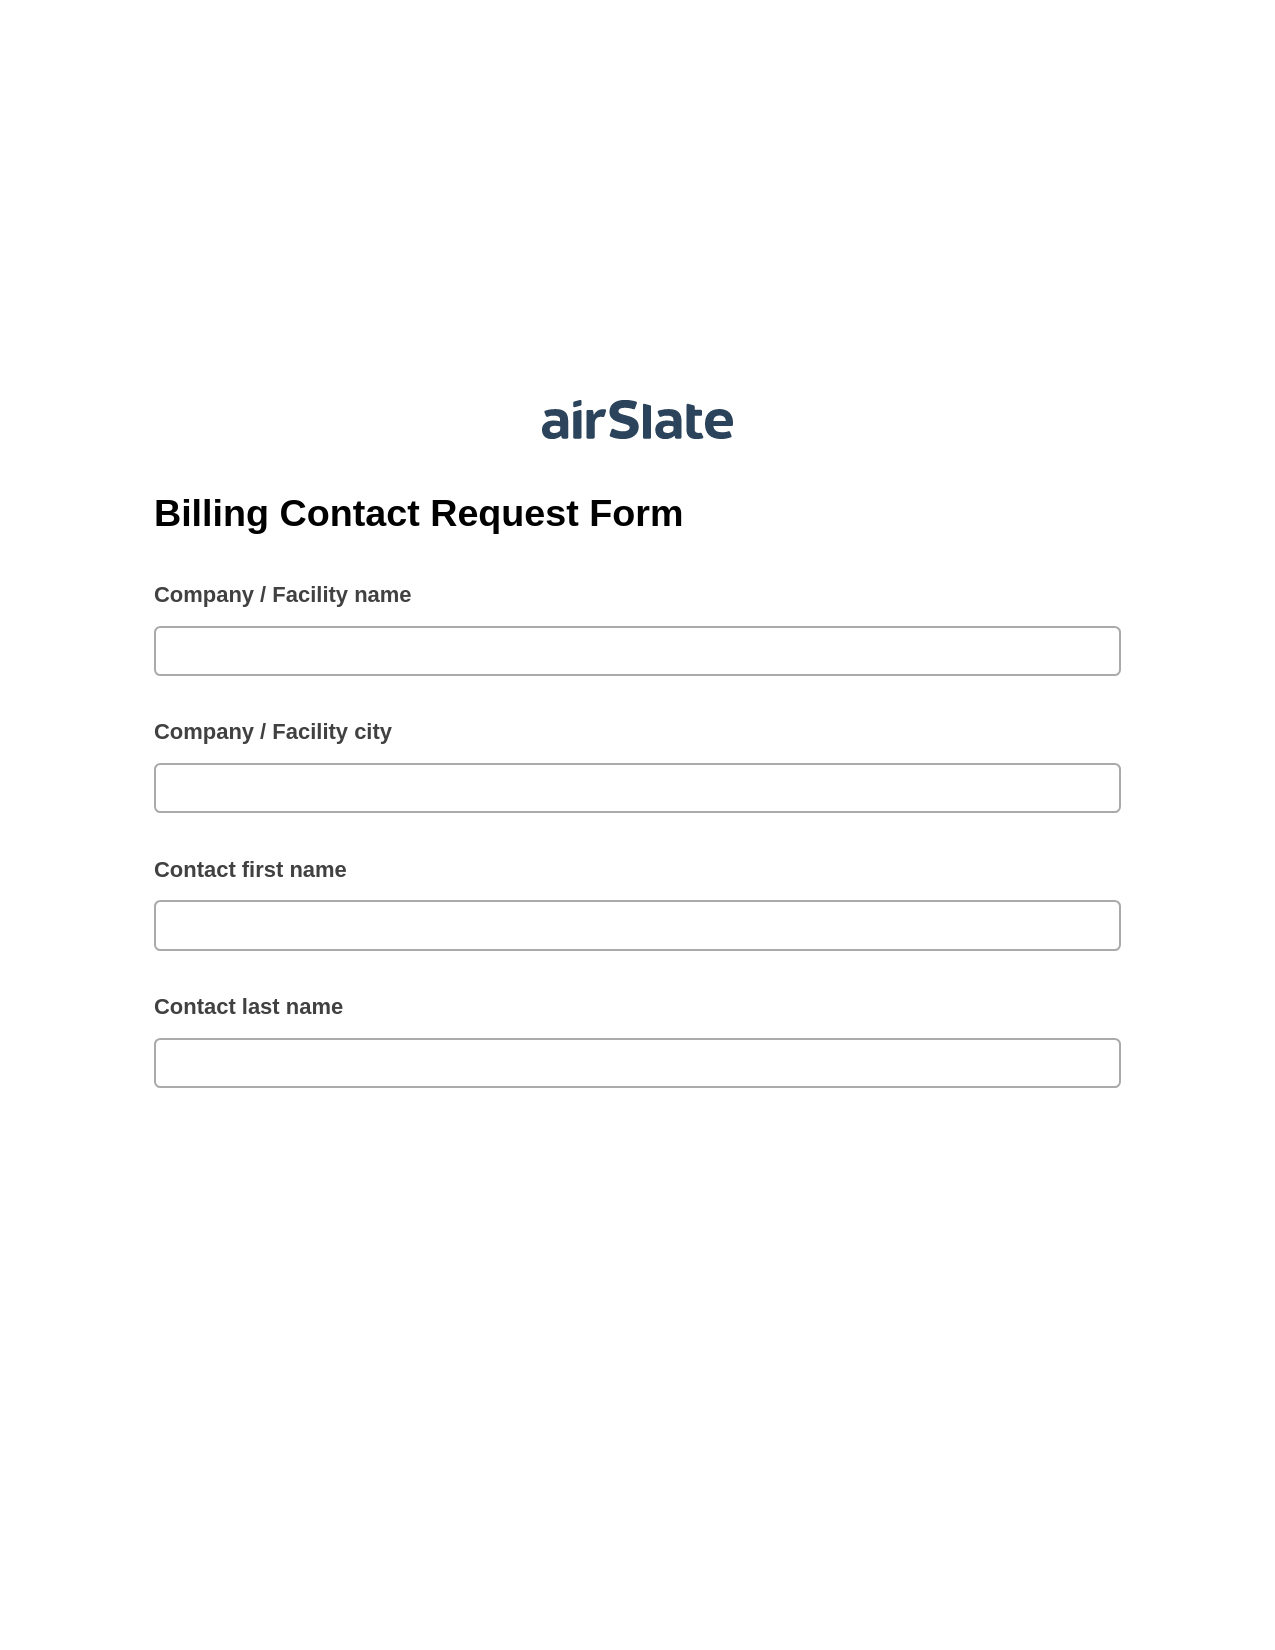 Multirole Billing Contact Request Form Pre-fill from another Slate Bot, Update MS Dynamics 365 Records Bot, Webhook Postfinish Bot